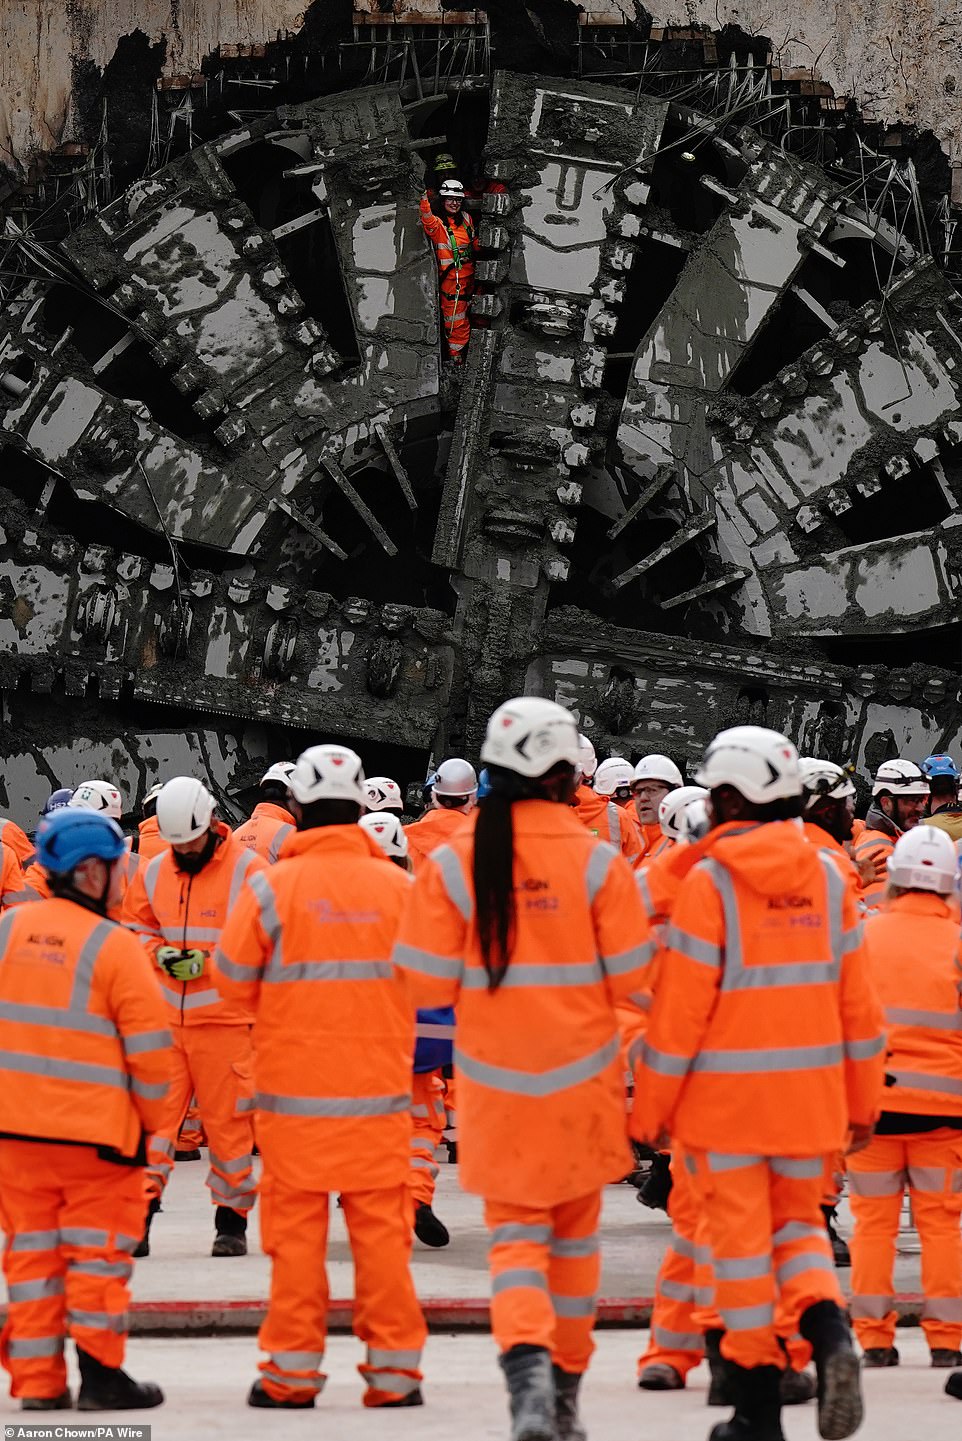 breakthrough! hs2 workers celebrate as machine digging controversial railway's longest-ever tunnel completes 10-mile journey beneath the chiltern hills